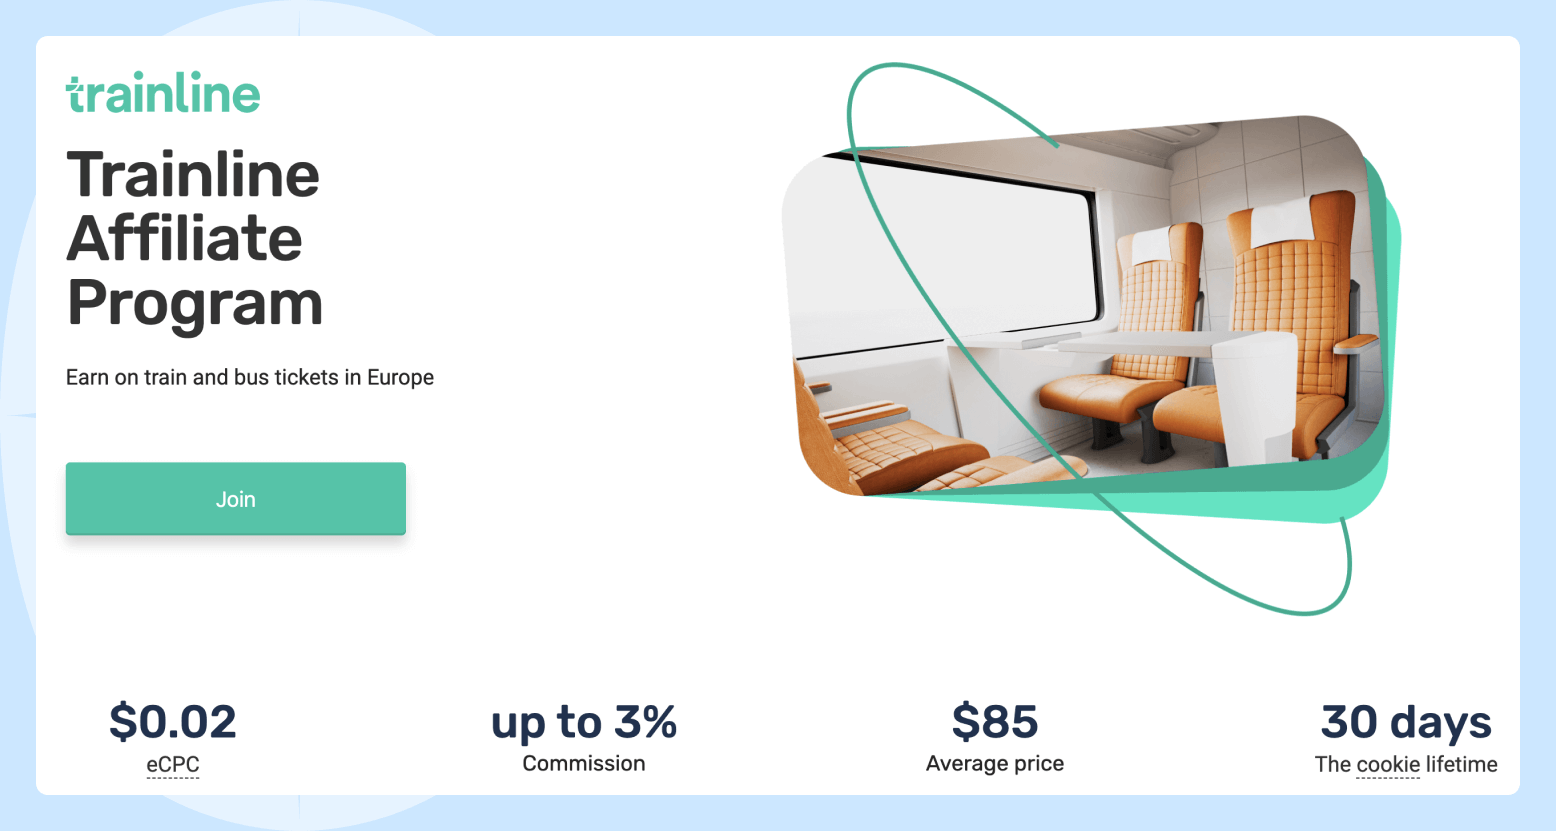 Landing page of the Trainline affiliate program with the terms of the program and a picture depicting seats on the train.